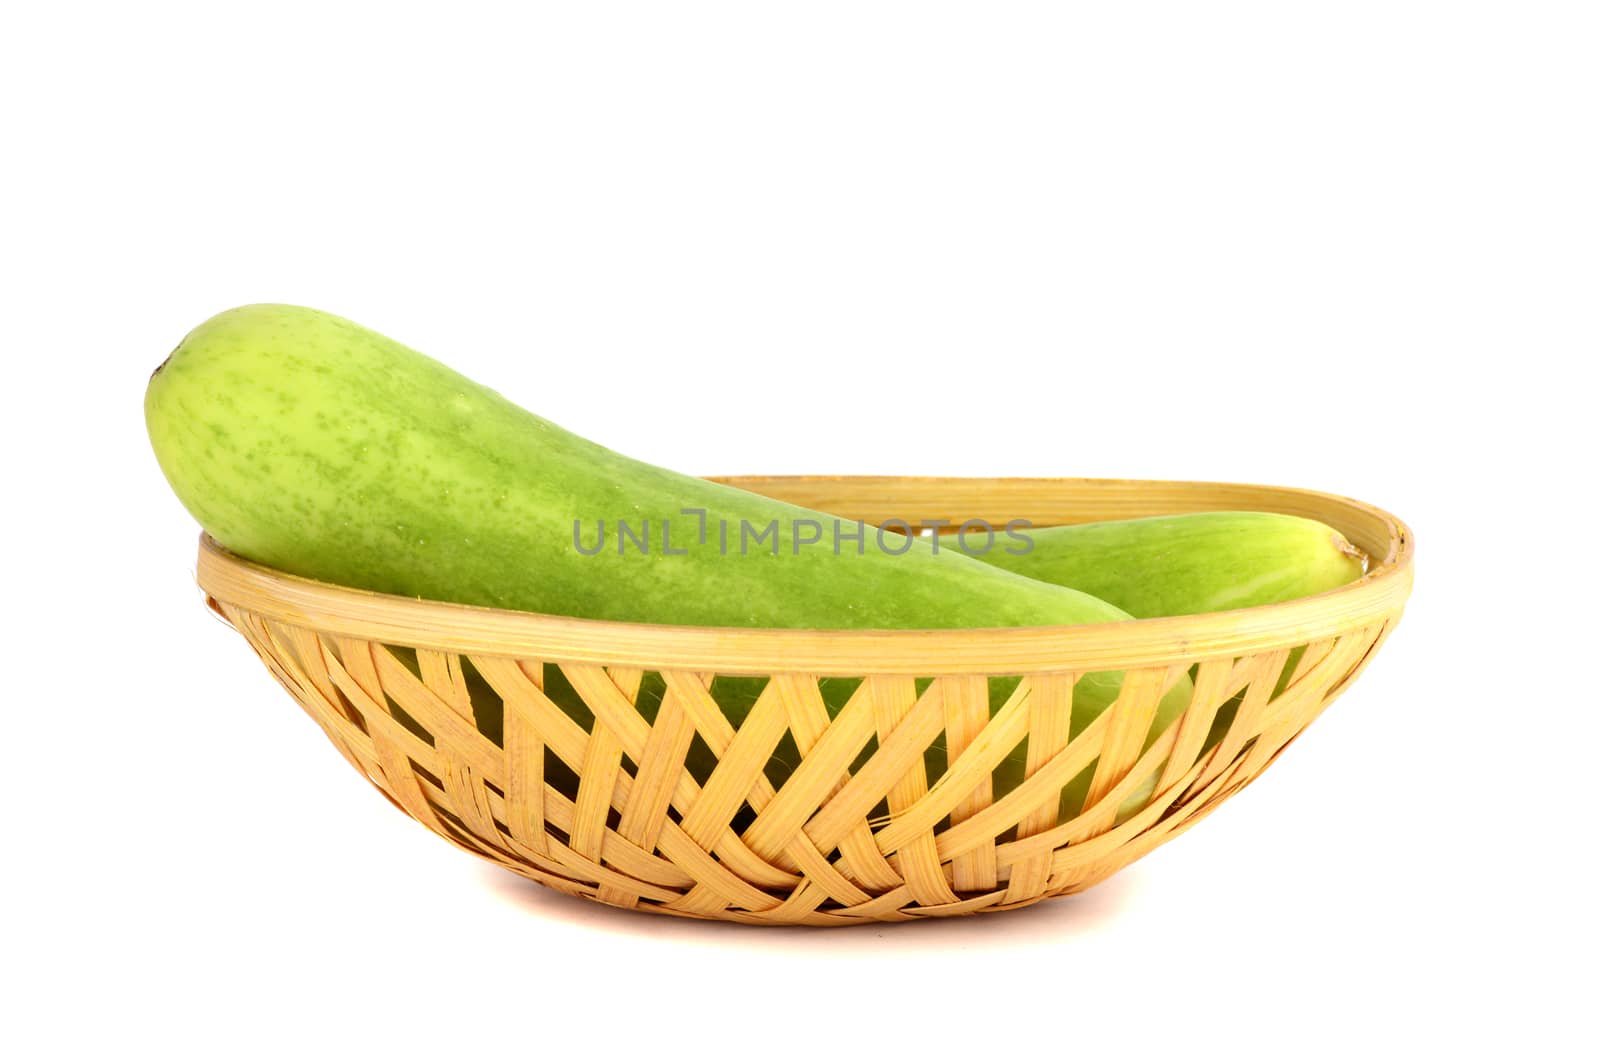 Fresh Cucumbers in basket isolated on white background